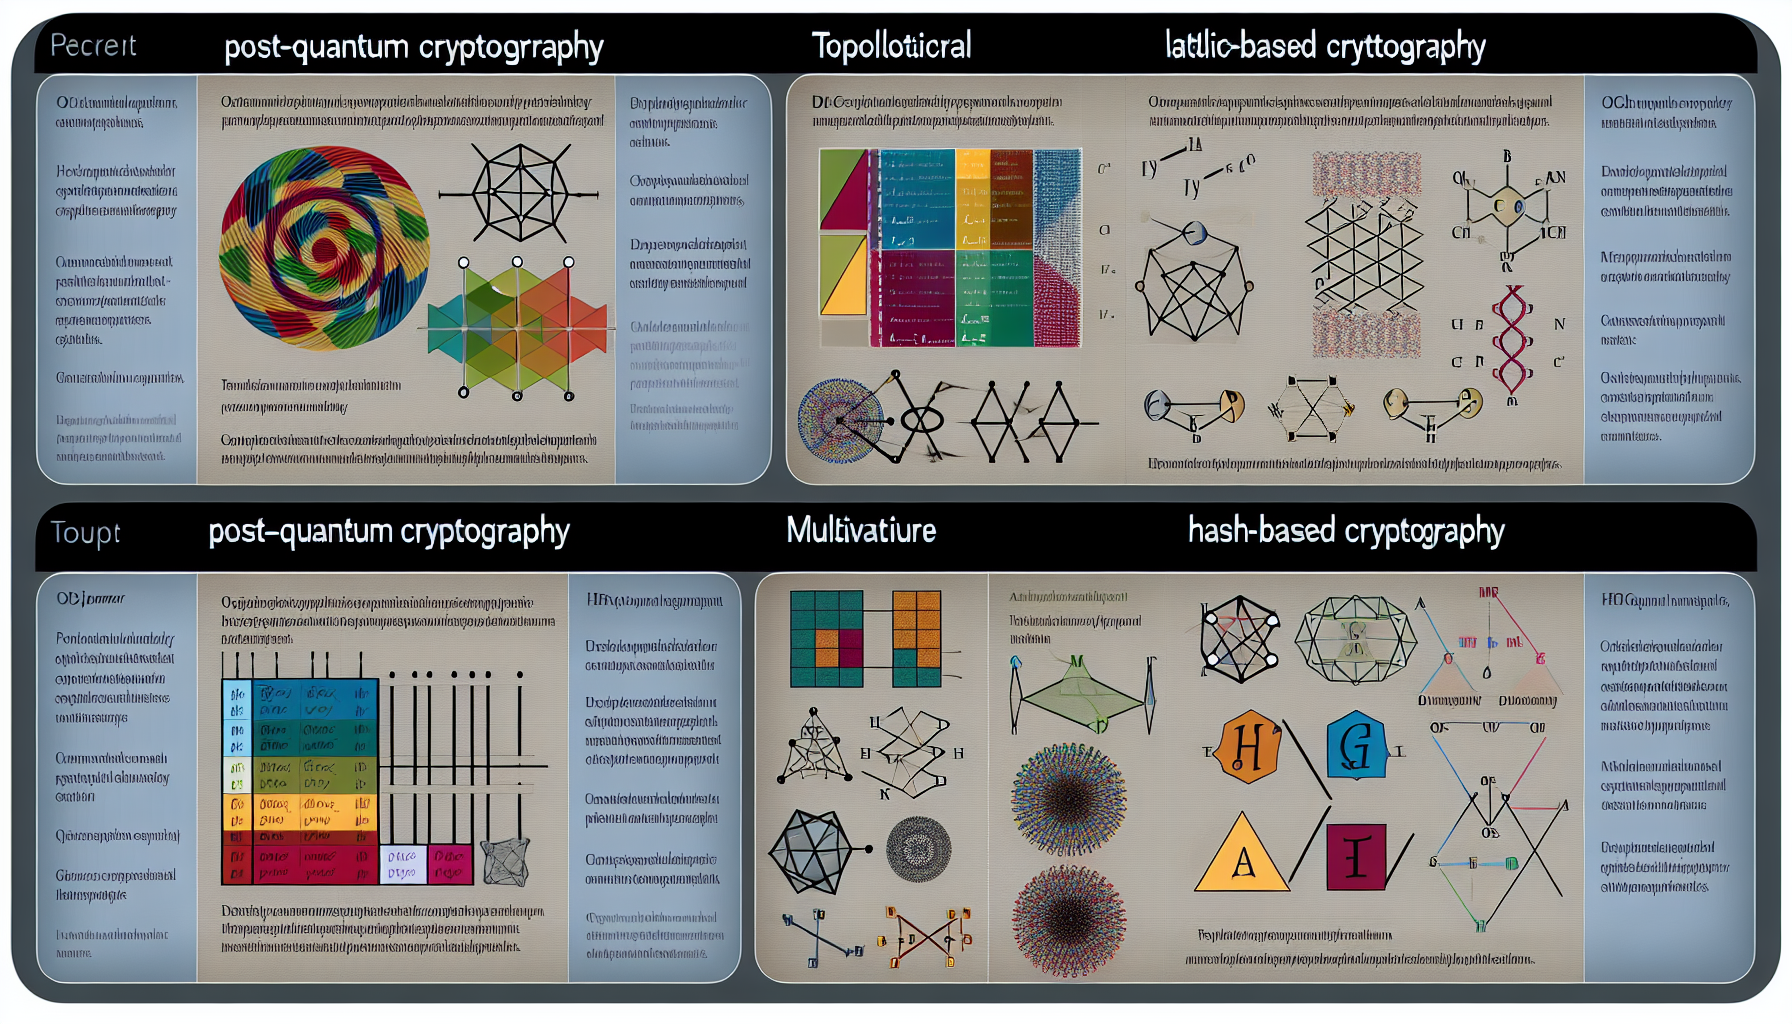 A diagram showcasing the different types of post-quantum cryptography algorithms